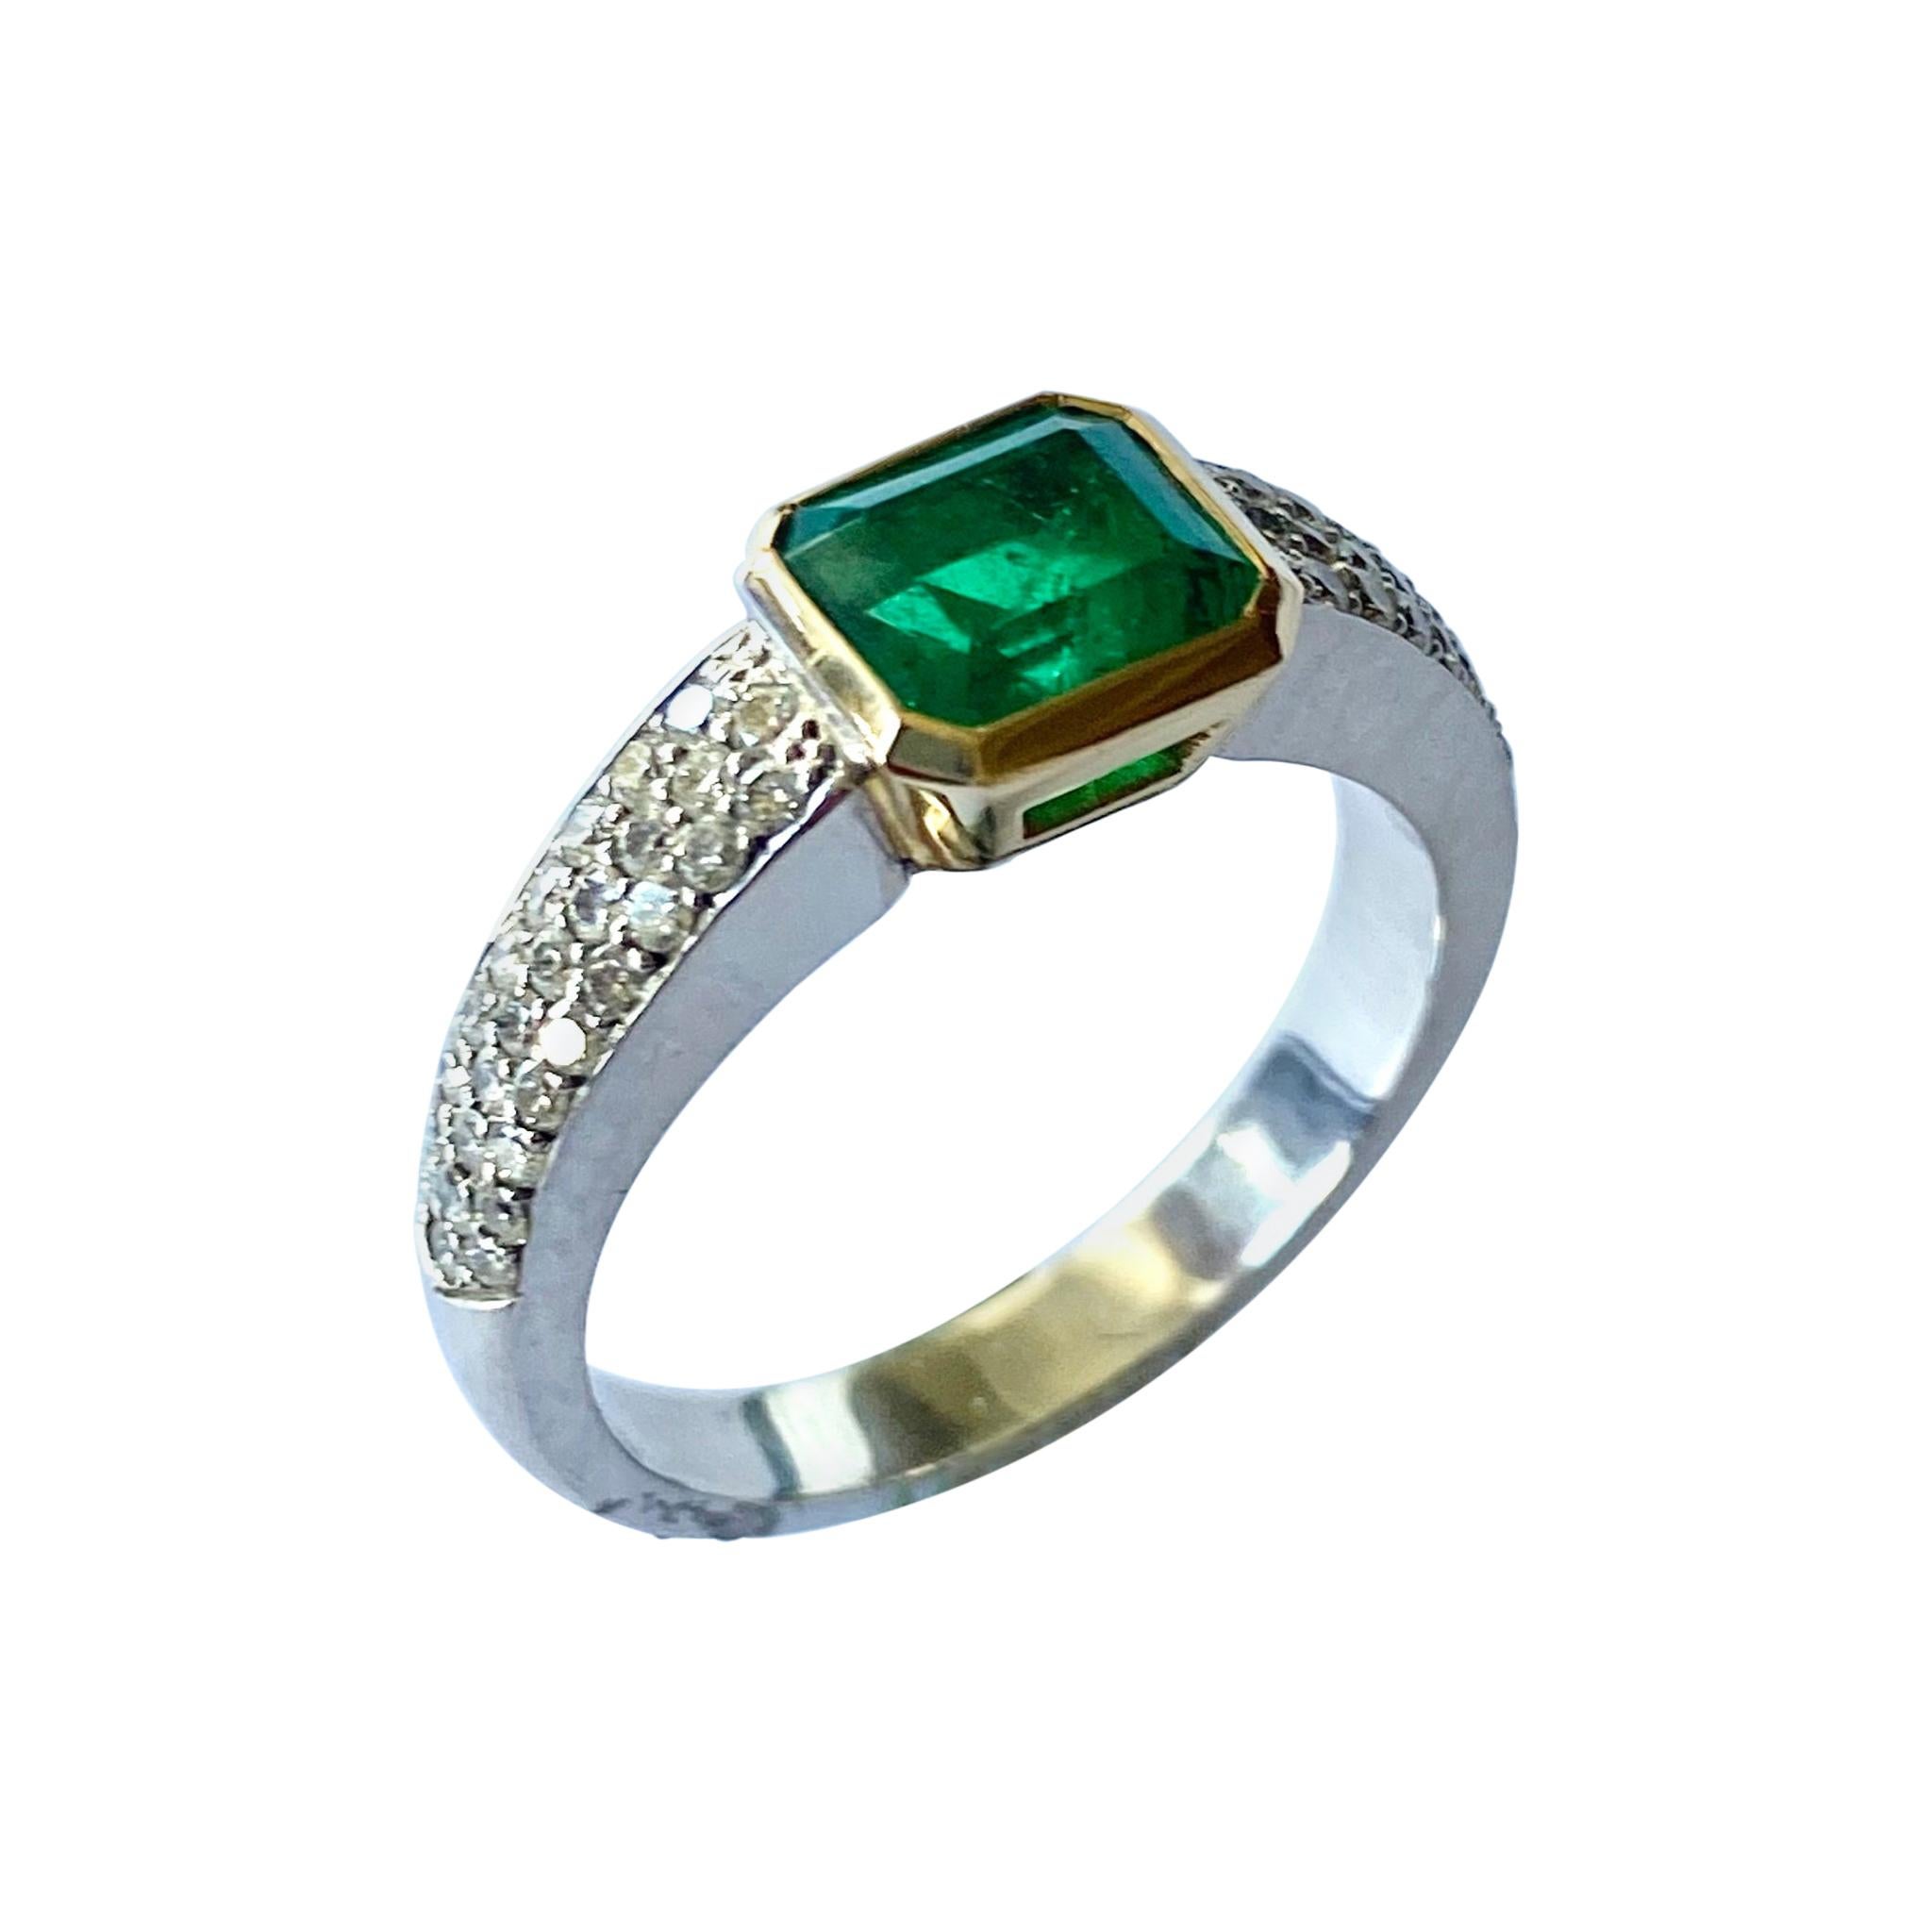 Colombia Emerald of 1.25 Ct and Diamonds Set in a 18k, Gold Hand Made Ring